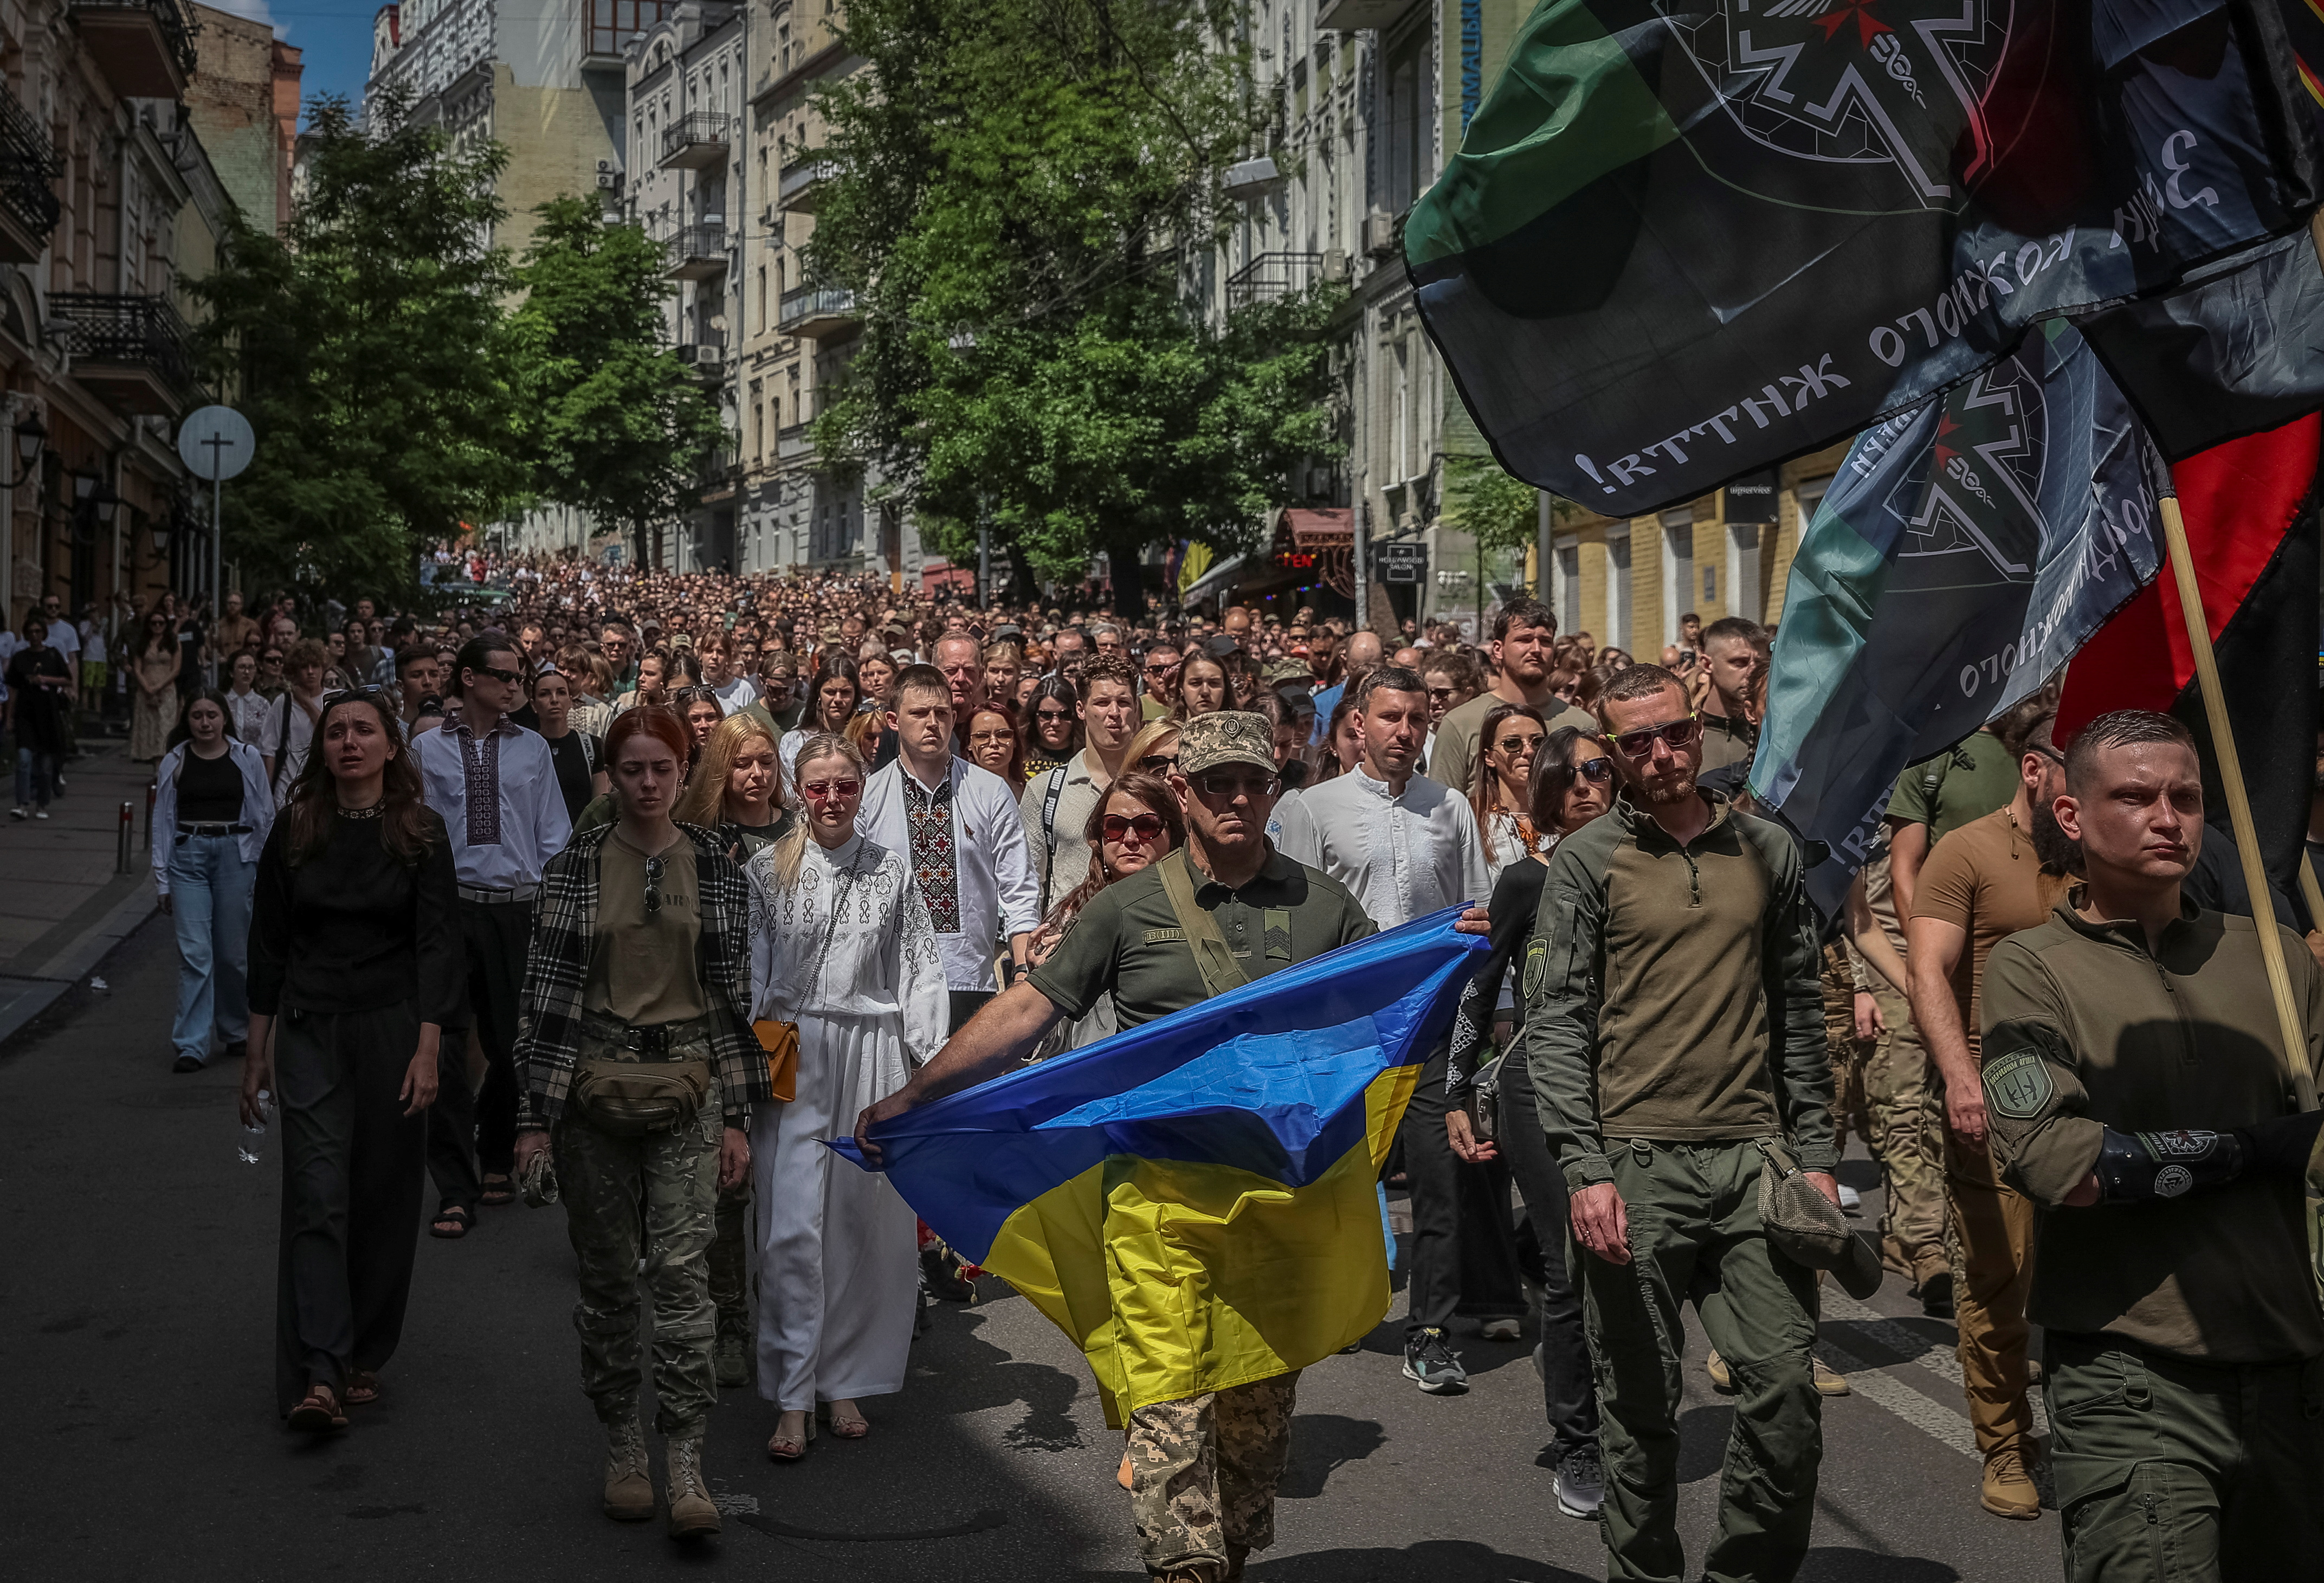 A funeral ceremony for Ukrainian volunteer medic of the Ukrainian volunteer paramedic organisation Hospitallers Tsybukh, who was killed in fighting against Russian troops in Kyiv